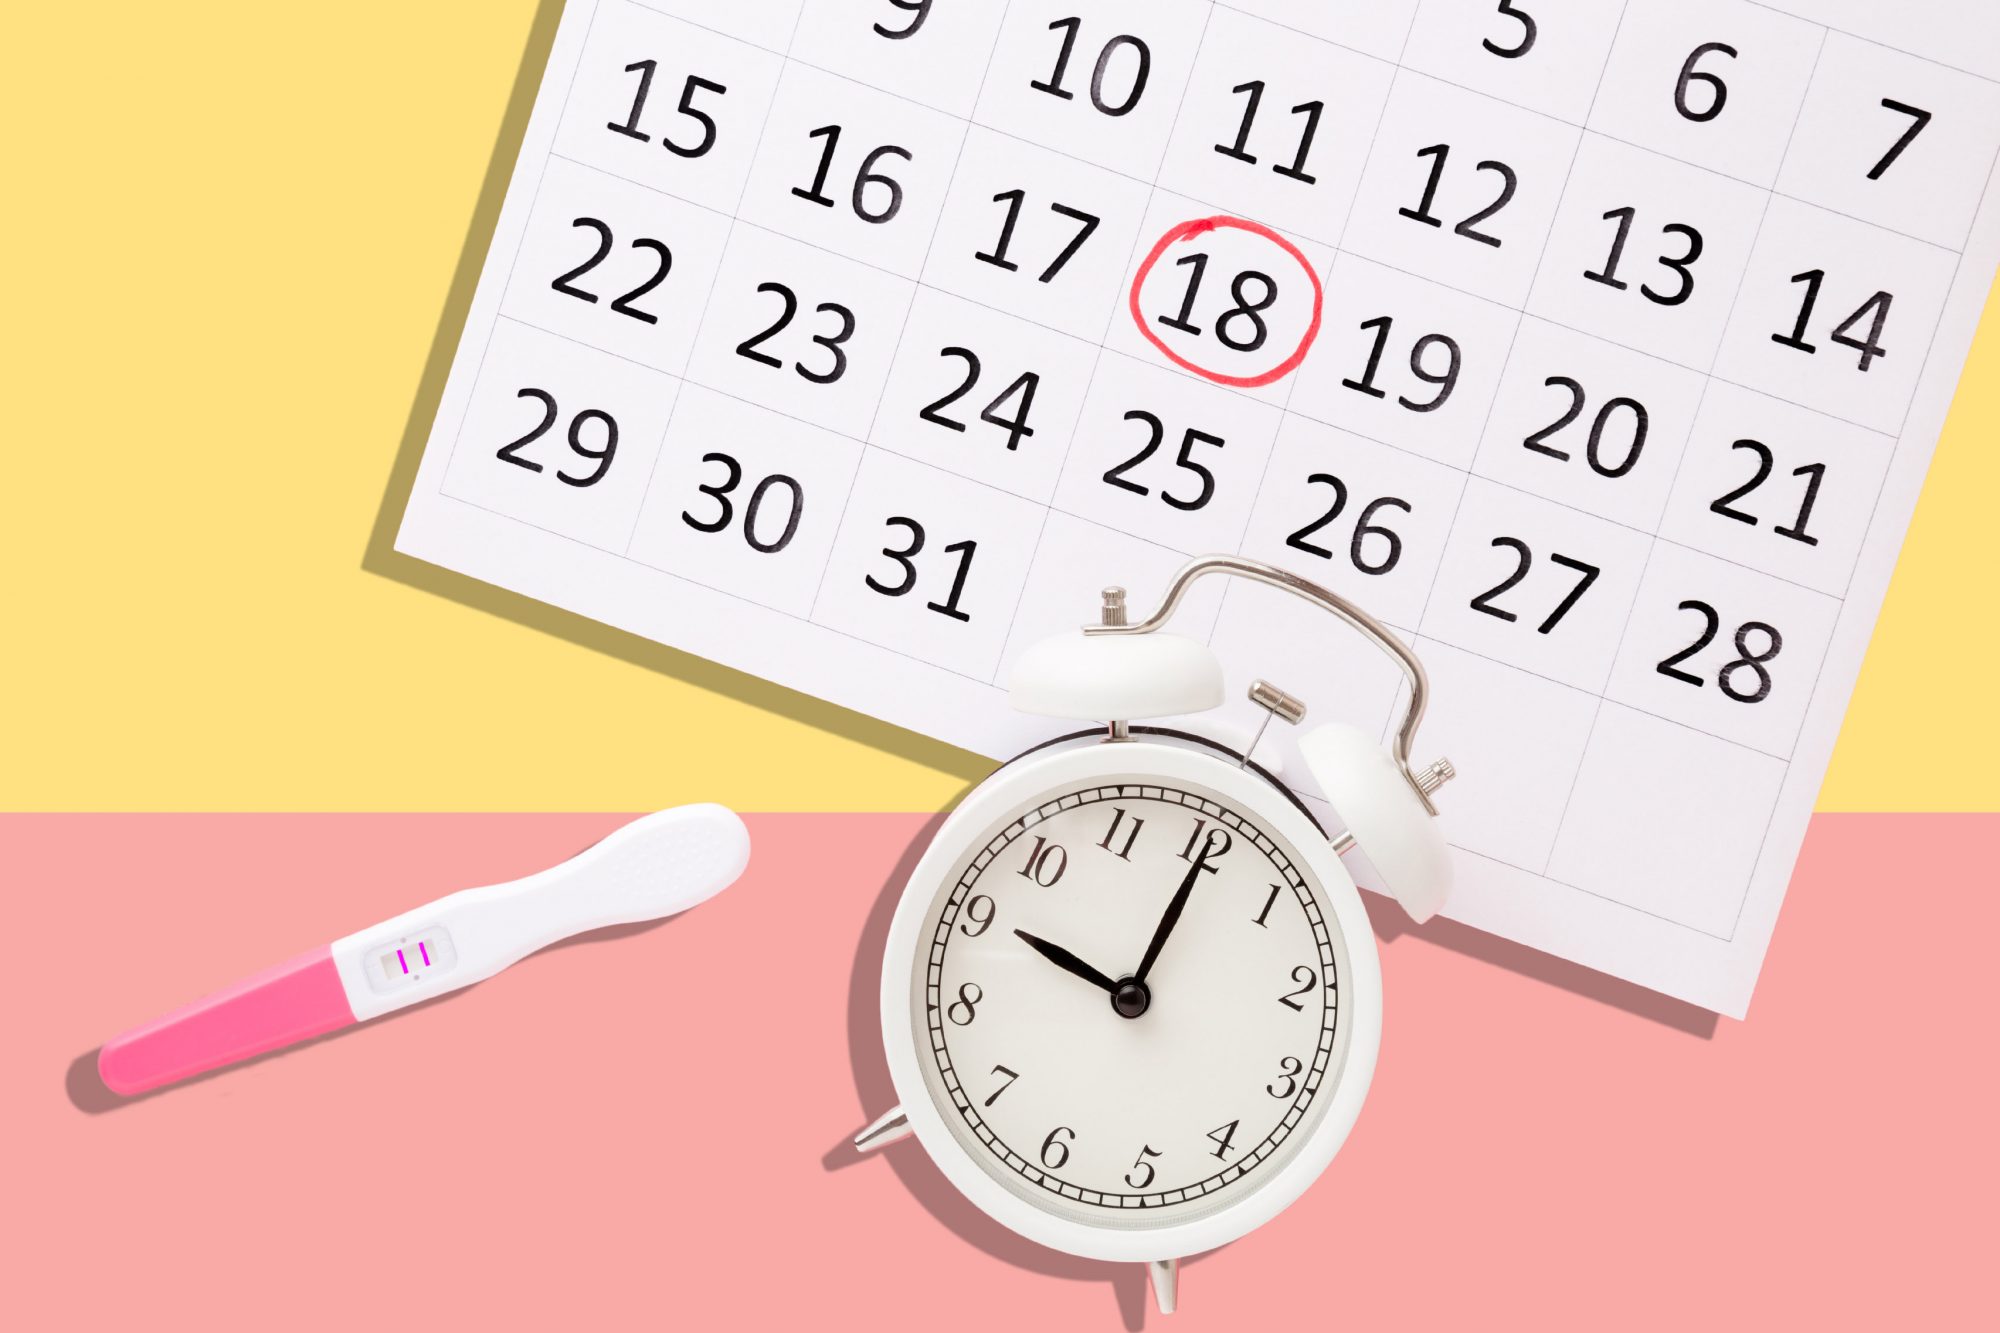 An image of a clock, pregnancy test, and a calendar on a colored background.